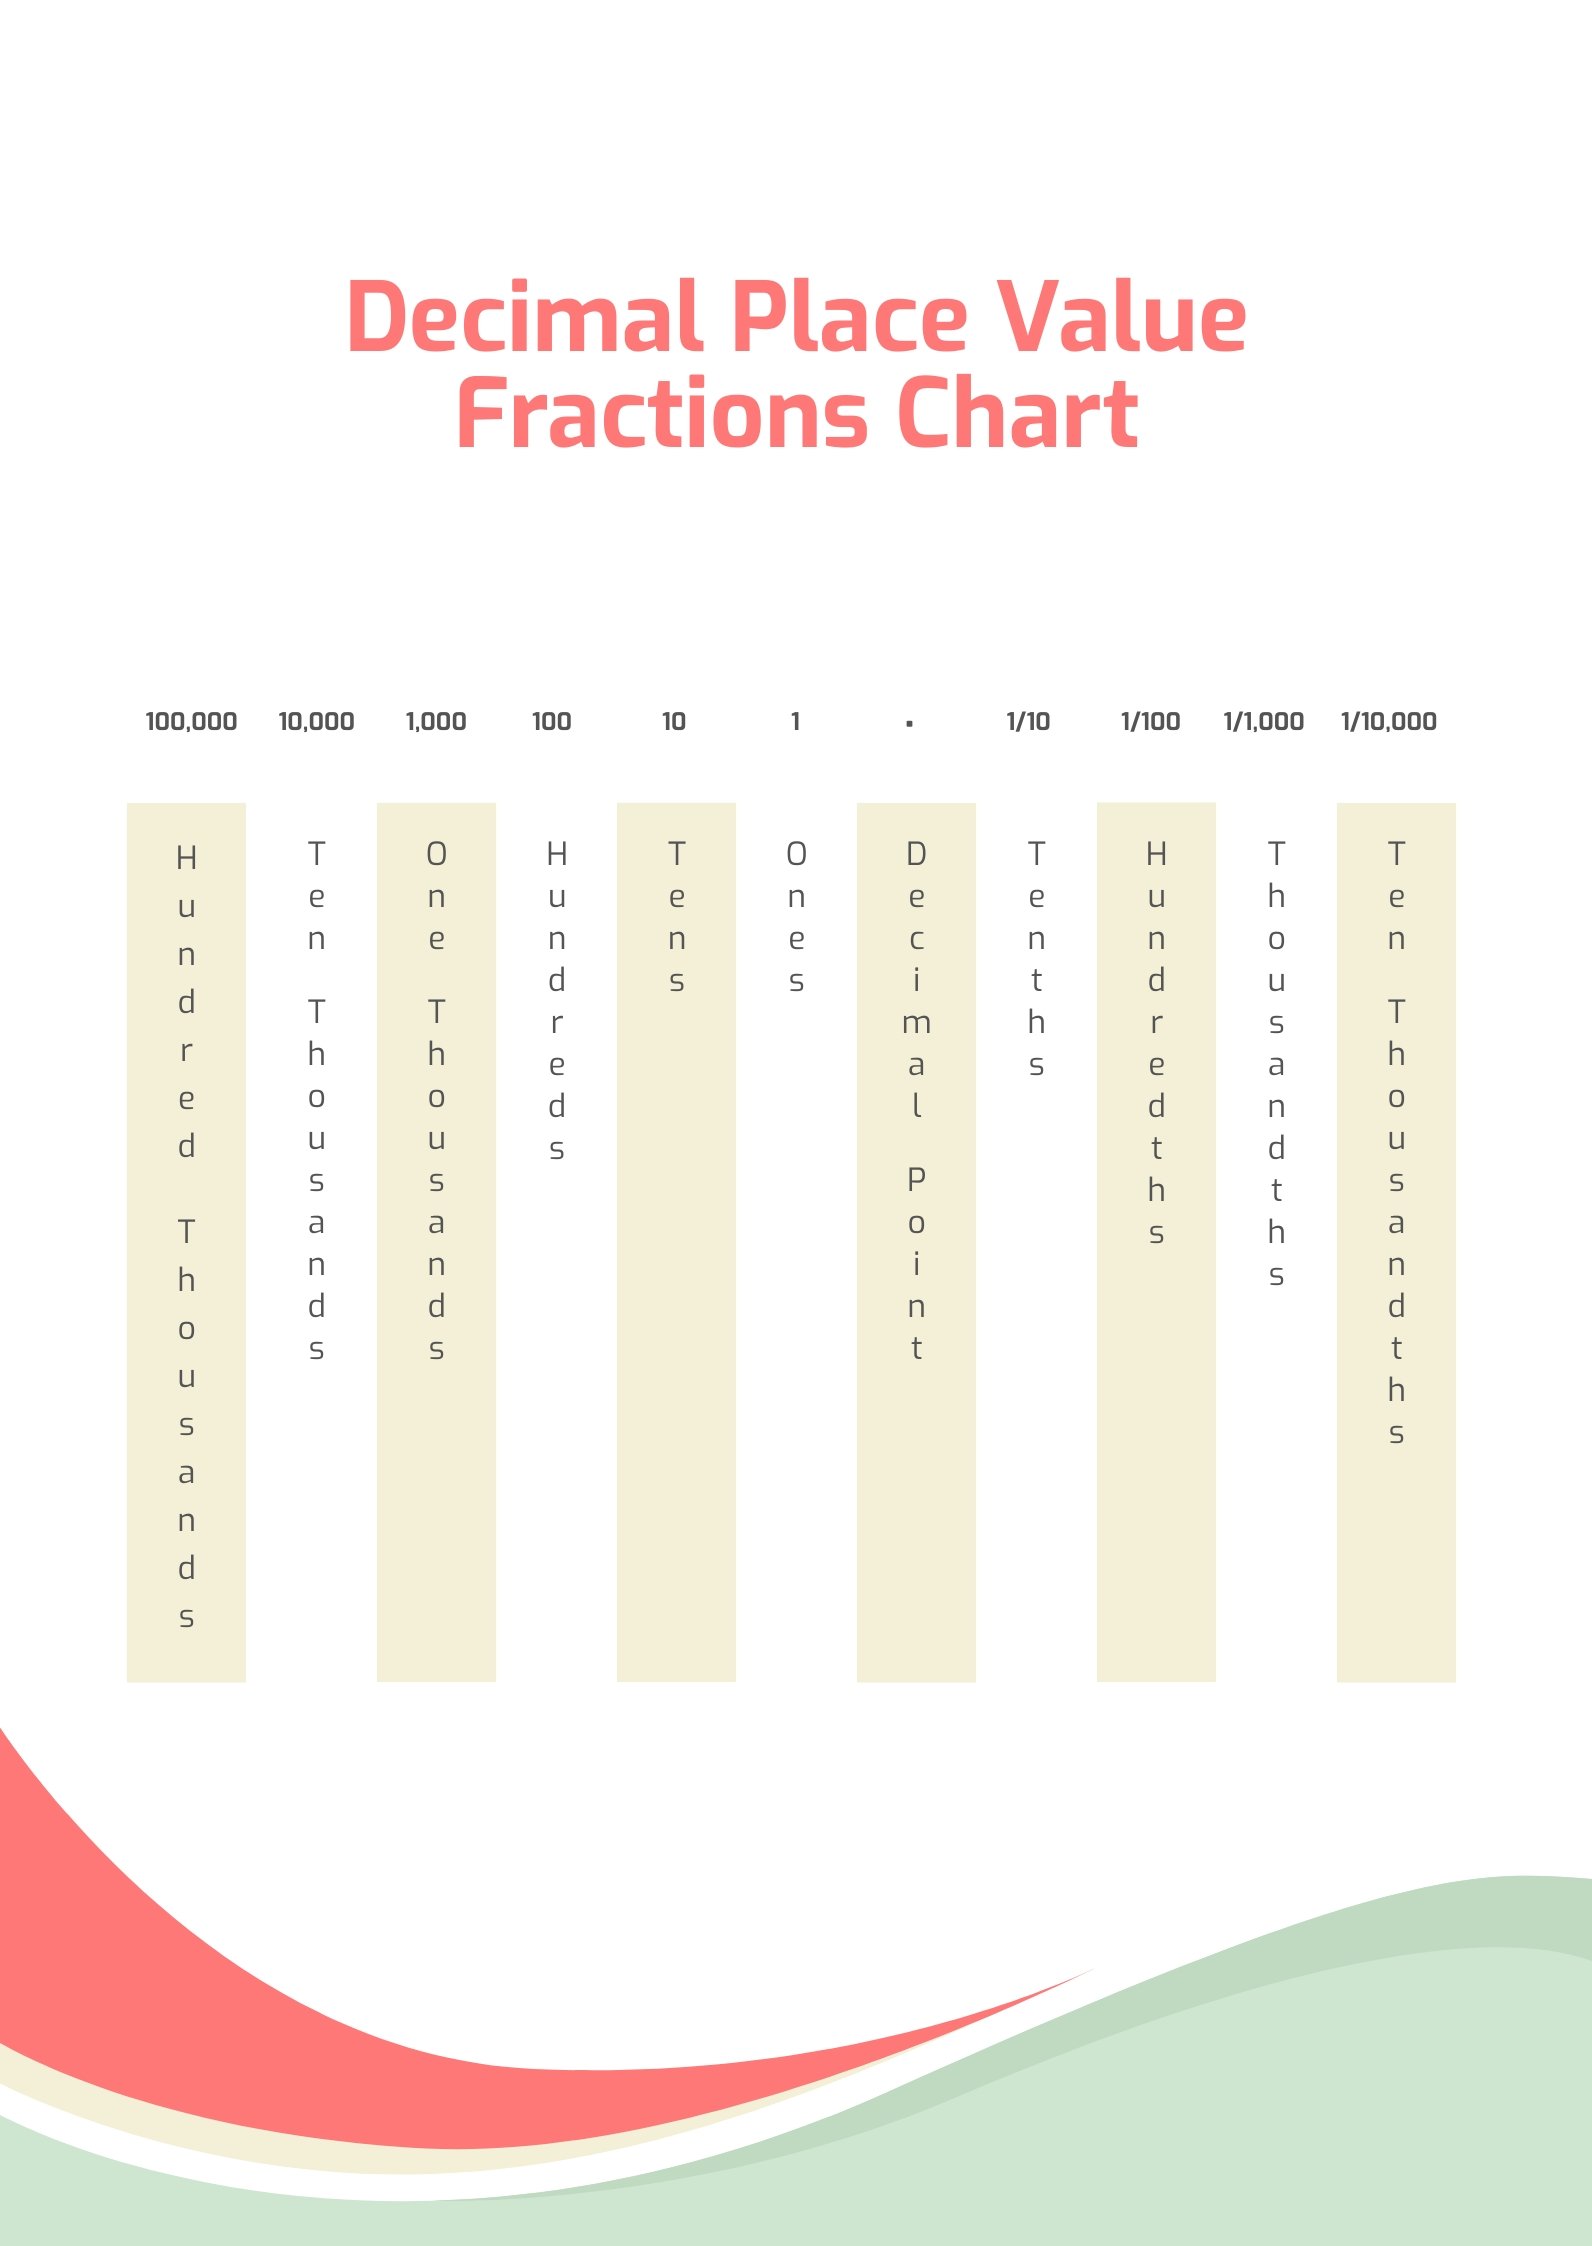 Decimal Place Value Fractions Chart in PDF